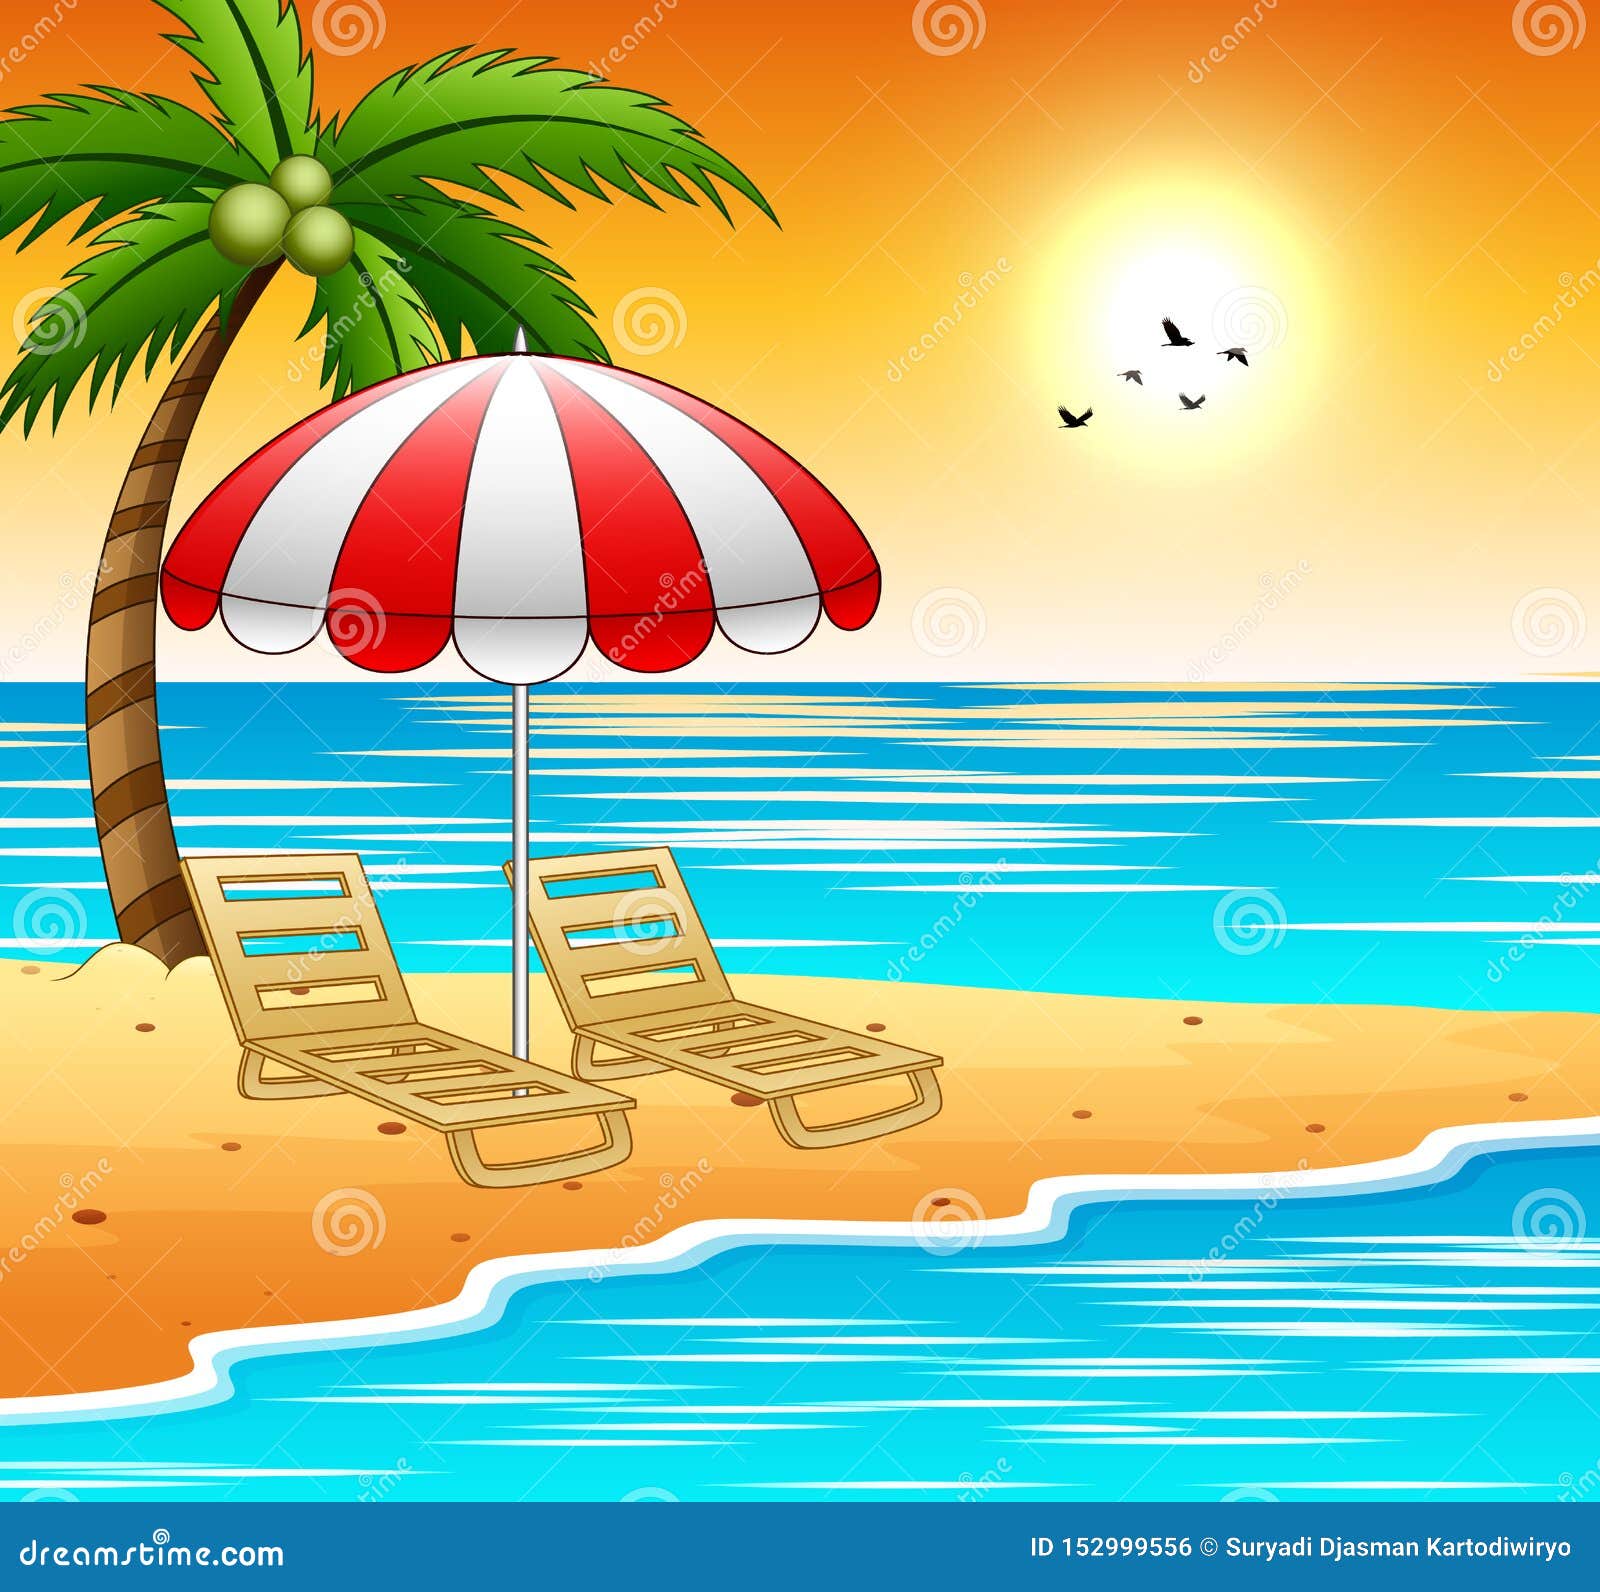 Two Sun Loungers and Parasols on a Beach with Sunset Stock Vector ...